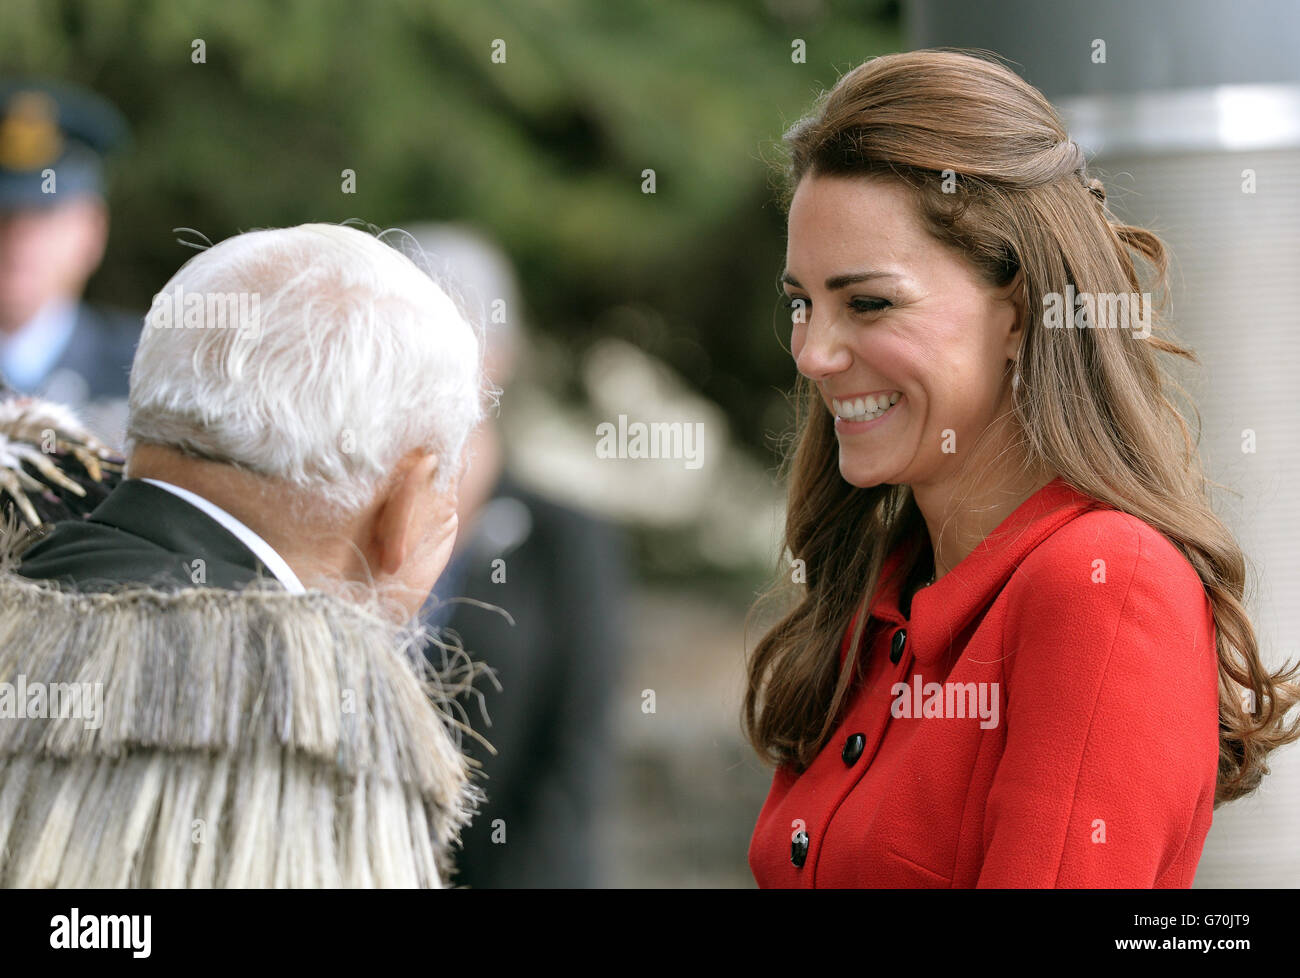 The Duchess of Cambridge performs a traditional greeting as the Duke and Duchess of Cambridge are greeted by members of the Ngai Tahu iwi as they attend a welcome ceremony at Christchurch City Council Building during the eighth day of their official tour to New Zealand. Stock Photo